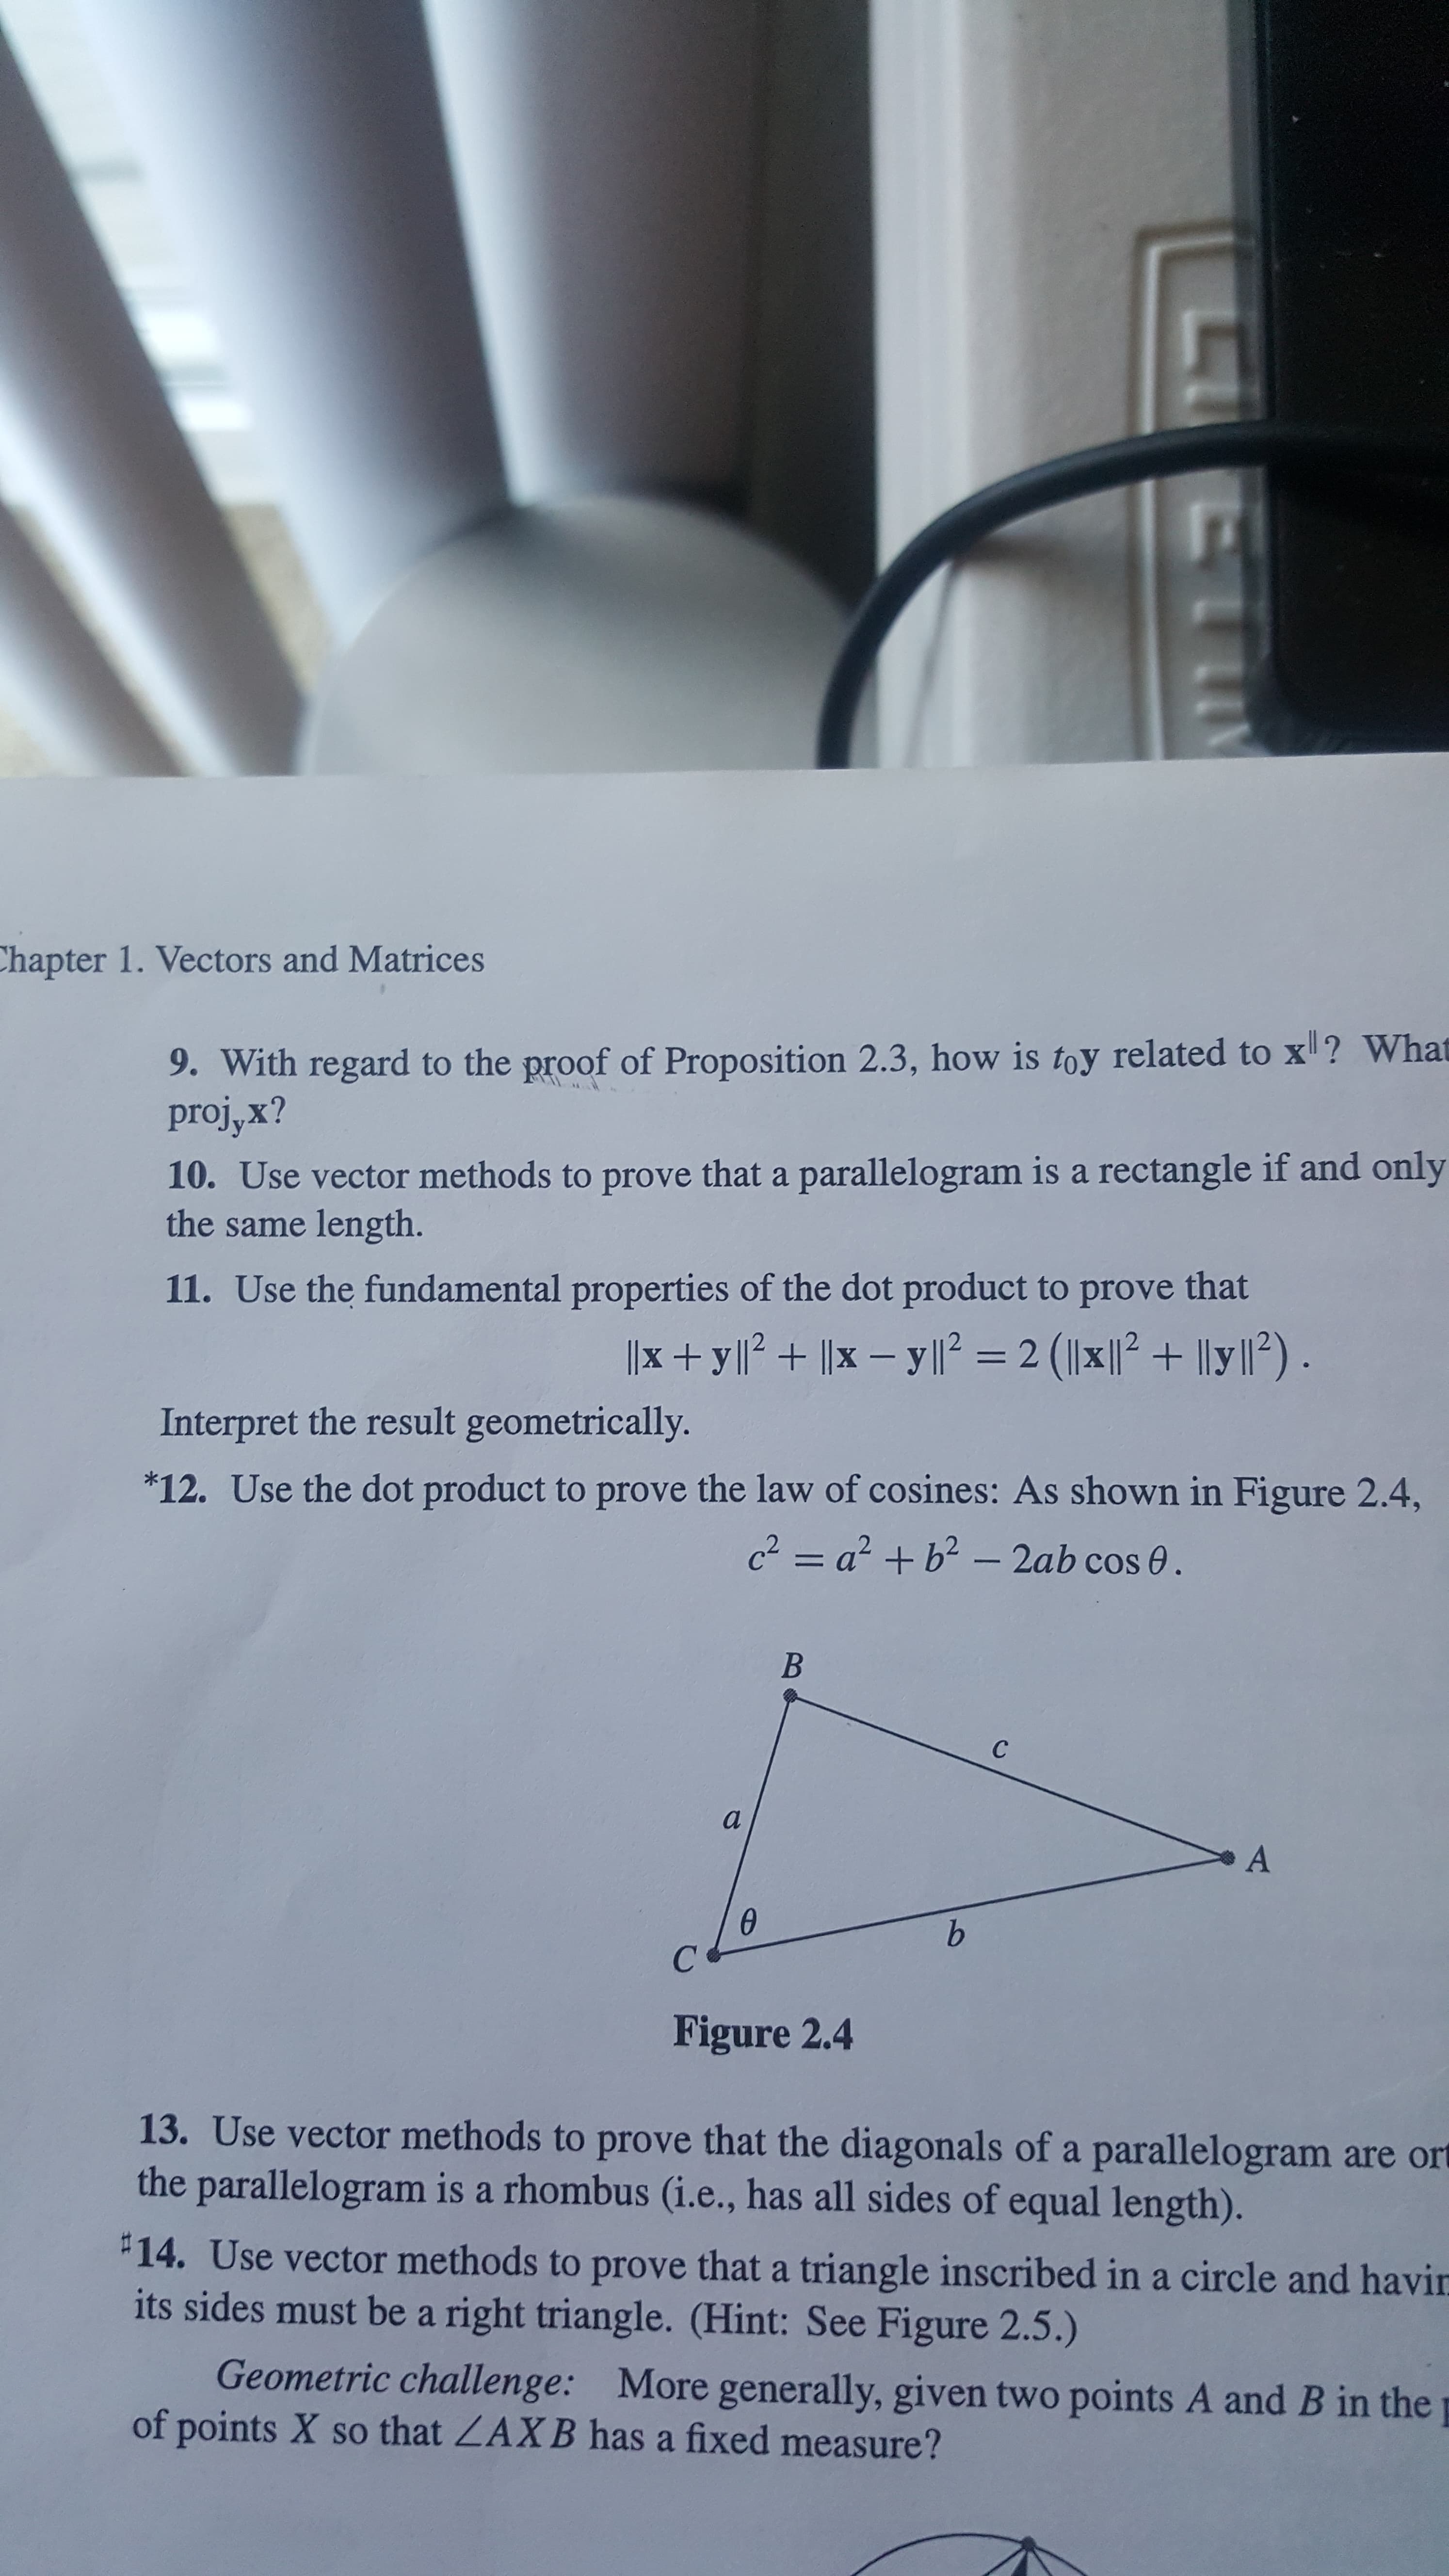 Chapter 1. Vectors and Matrices
9. With regard to the proof of Proposition 2.3, how is toy related to x ? What
proj,x?
10. Use vector methods to prove that a parallelogram is a rectangle if and only
the same length.
11. Use the fundamental properties of the dot product to prove that
x + ylP+ x - yll2 2 (lxl2 1ly2)
Interpret the result geometrically.
*12. Use the dot product to prove the law of cosines: As shown in Figure 2.4,
c2= a2 b2- 2ab cos 0.
B
C
a
A
b
Figure 2.4
13. Use vector methods to prove that the diagonals of a parallelogram are ort
the parallelogram is a rhombus (i.e., has all sides of equal length).
14. Use vector methods to prove that a triangle inscribed in a circle and havin
its sides must be a right triangle. (Hint: See Figure 2.5.)
Geometric challenge: More generally, given two points A and B in the
of points X so that ZAXB has a fixed measure?
